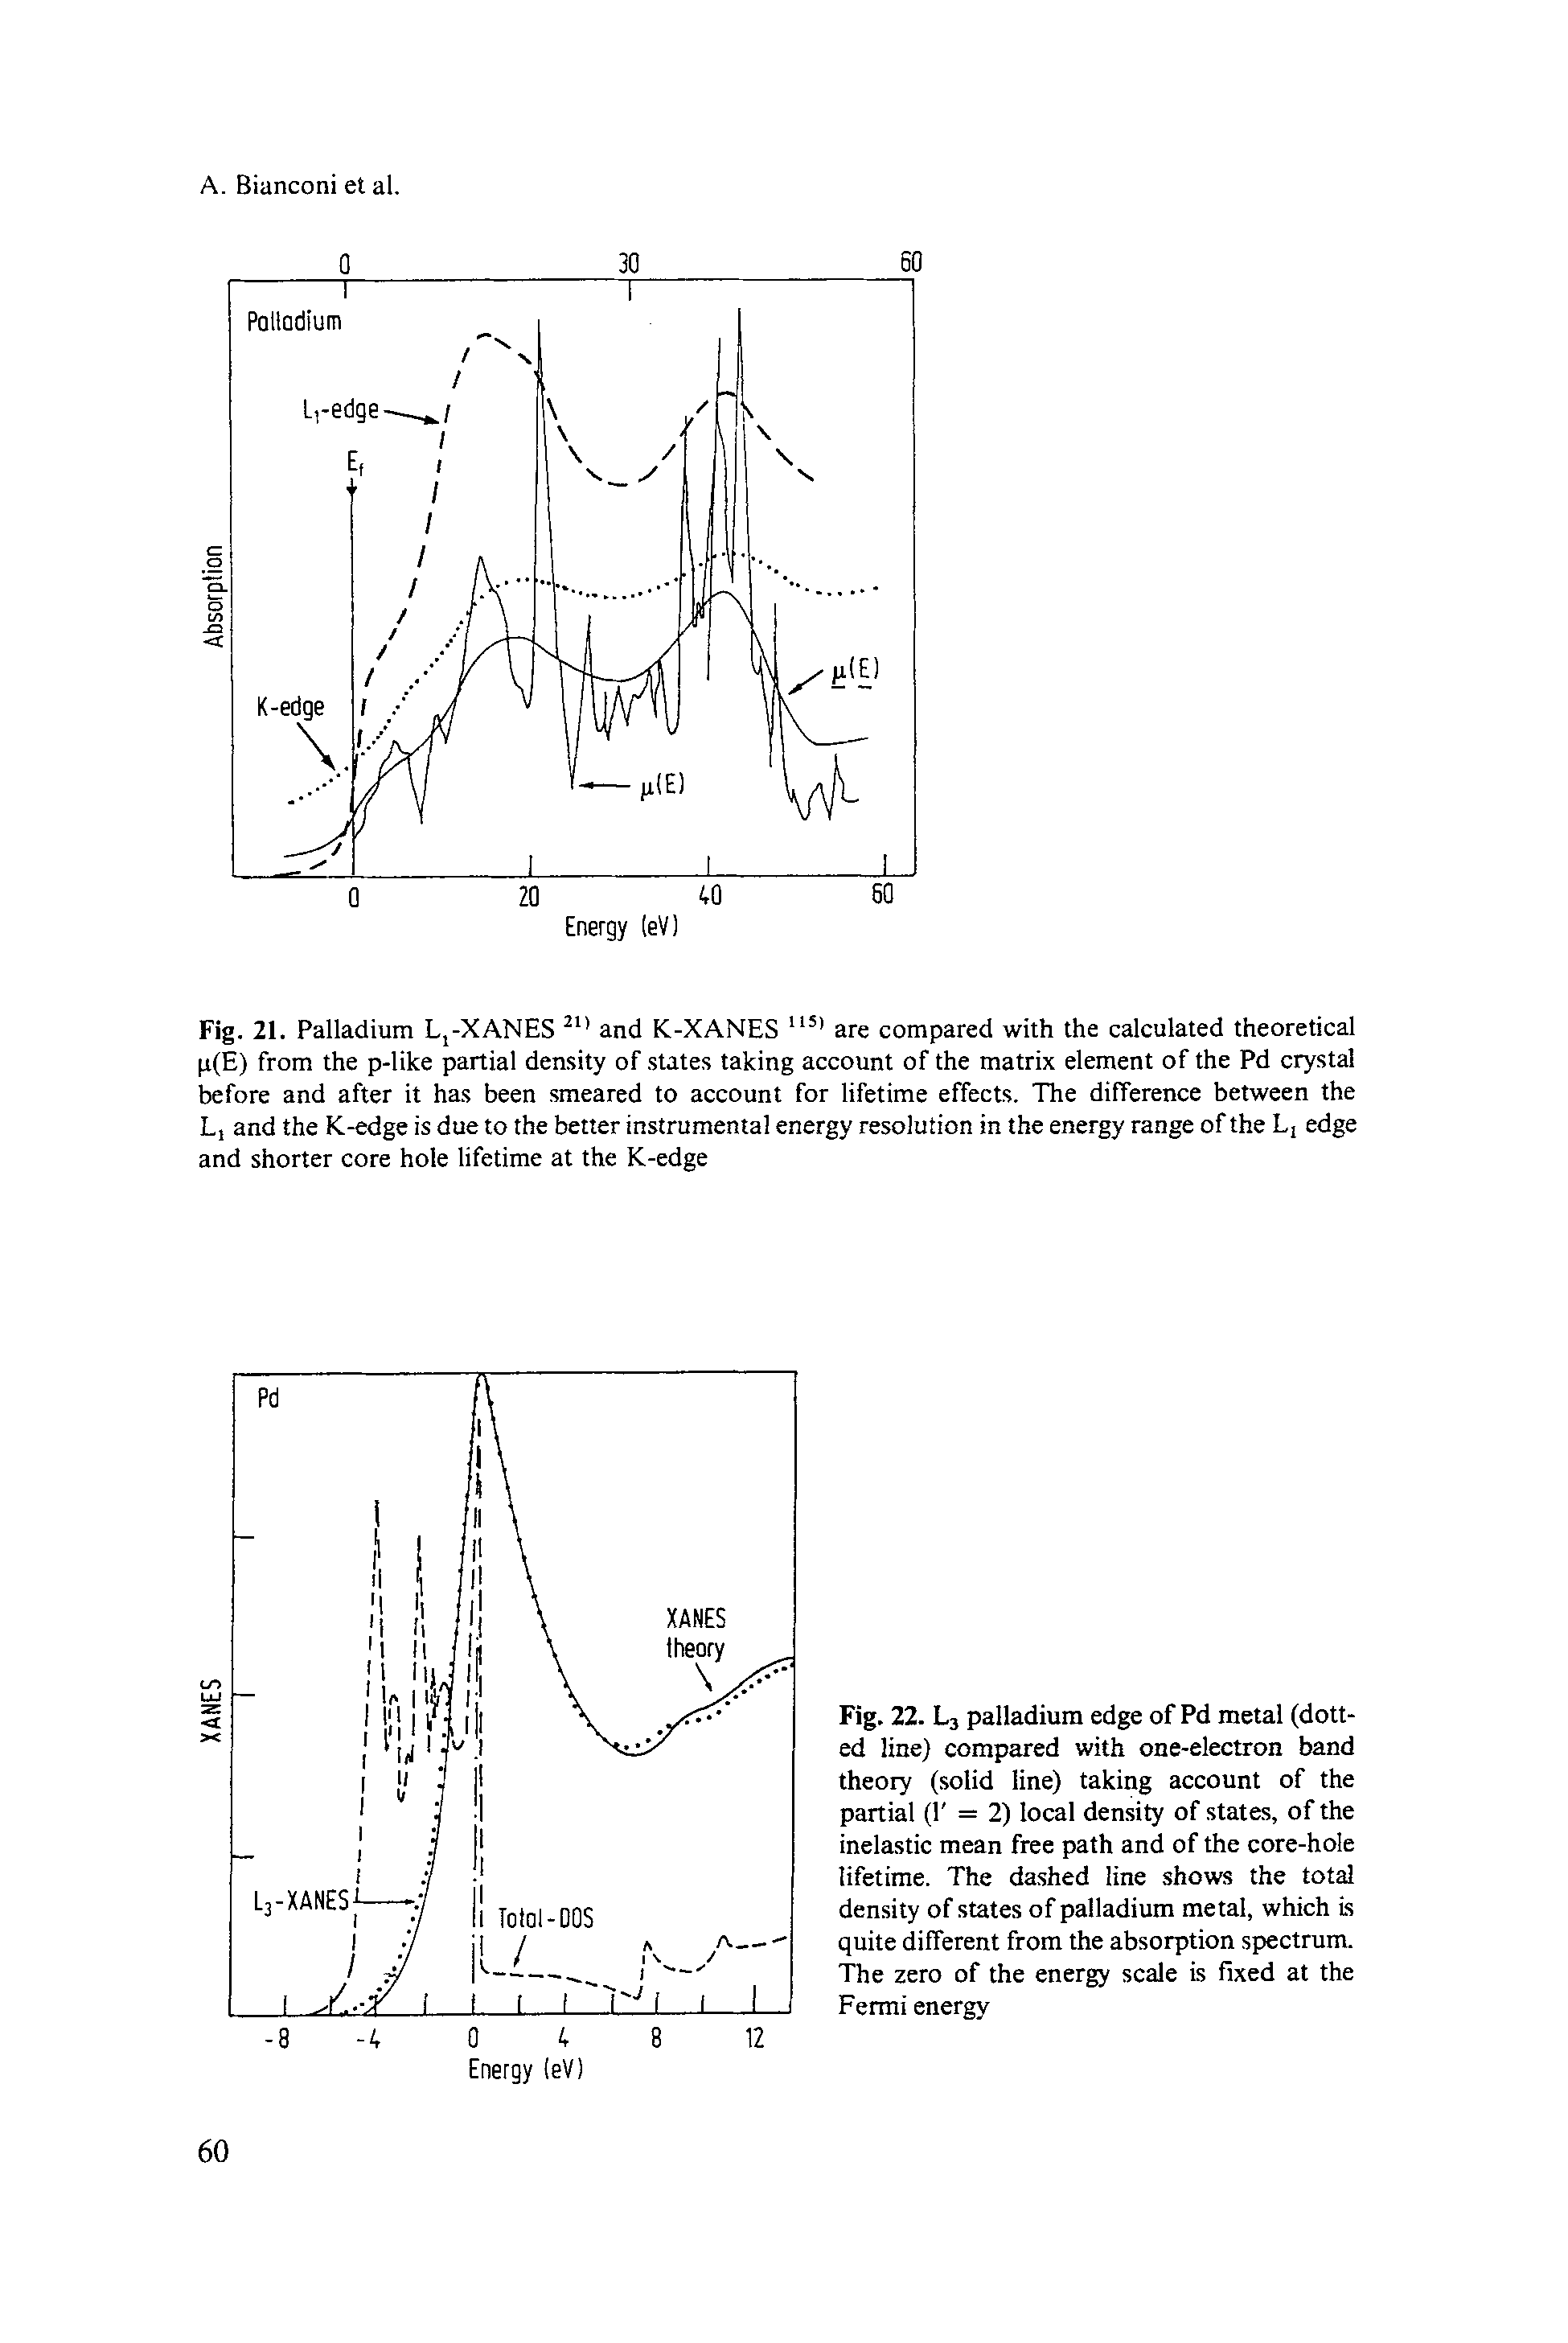 Fig. 21. Palladium L,-XANES and K-XANES are compared with the calculated theoretical p(E) from the p-like partial density of states taking account of the matrix element of the Pd crystal before and after it has been smeared to account for lifetime effects. The difference between the L, and the K-edge is due to the better instrumental energy resolution in the energy range of the Lj edge and shorter core hole lifetime at the K-edge...